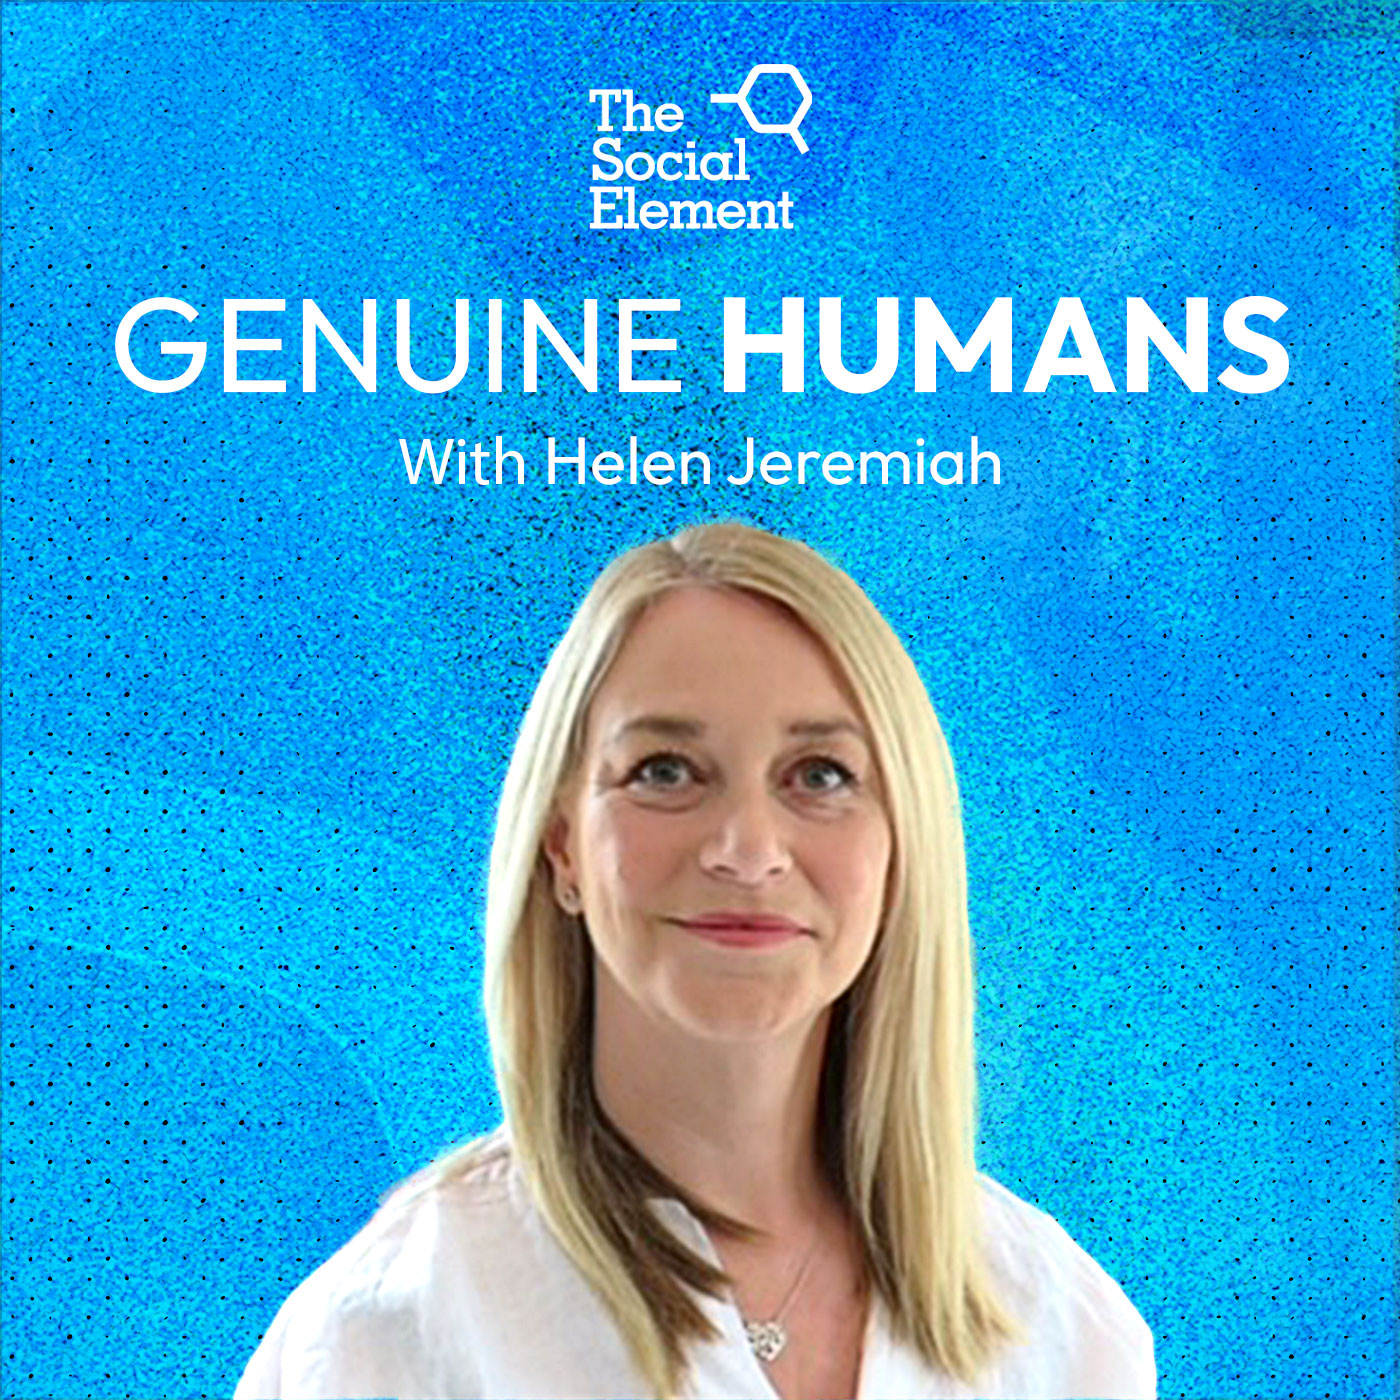 Helen Jeremiah: Growing with the brand